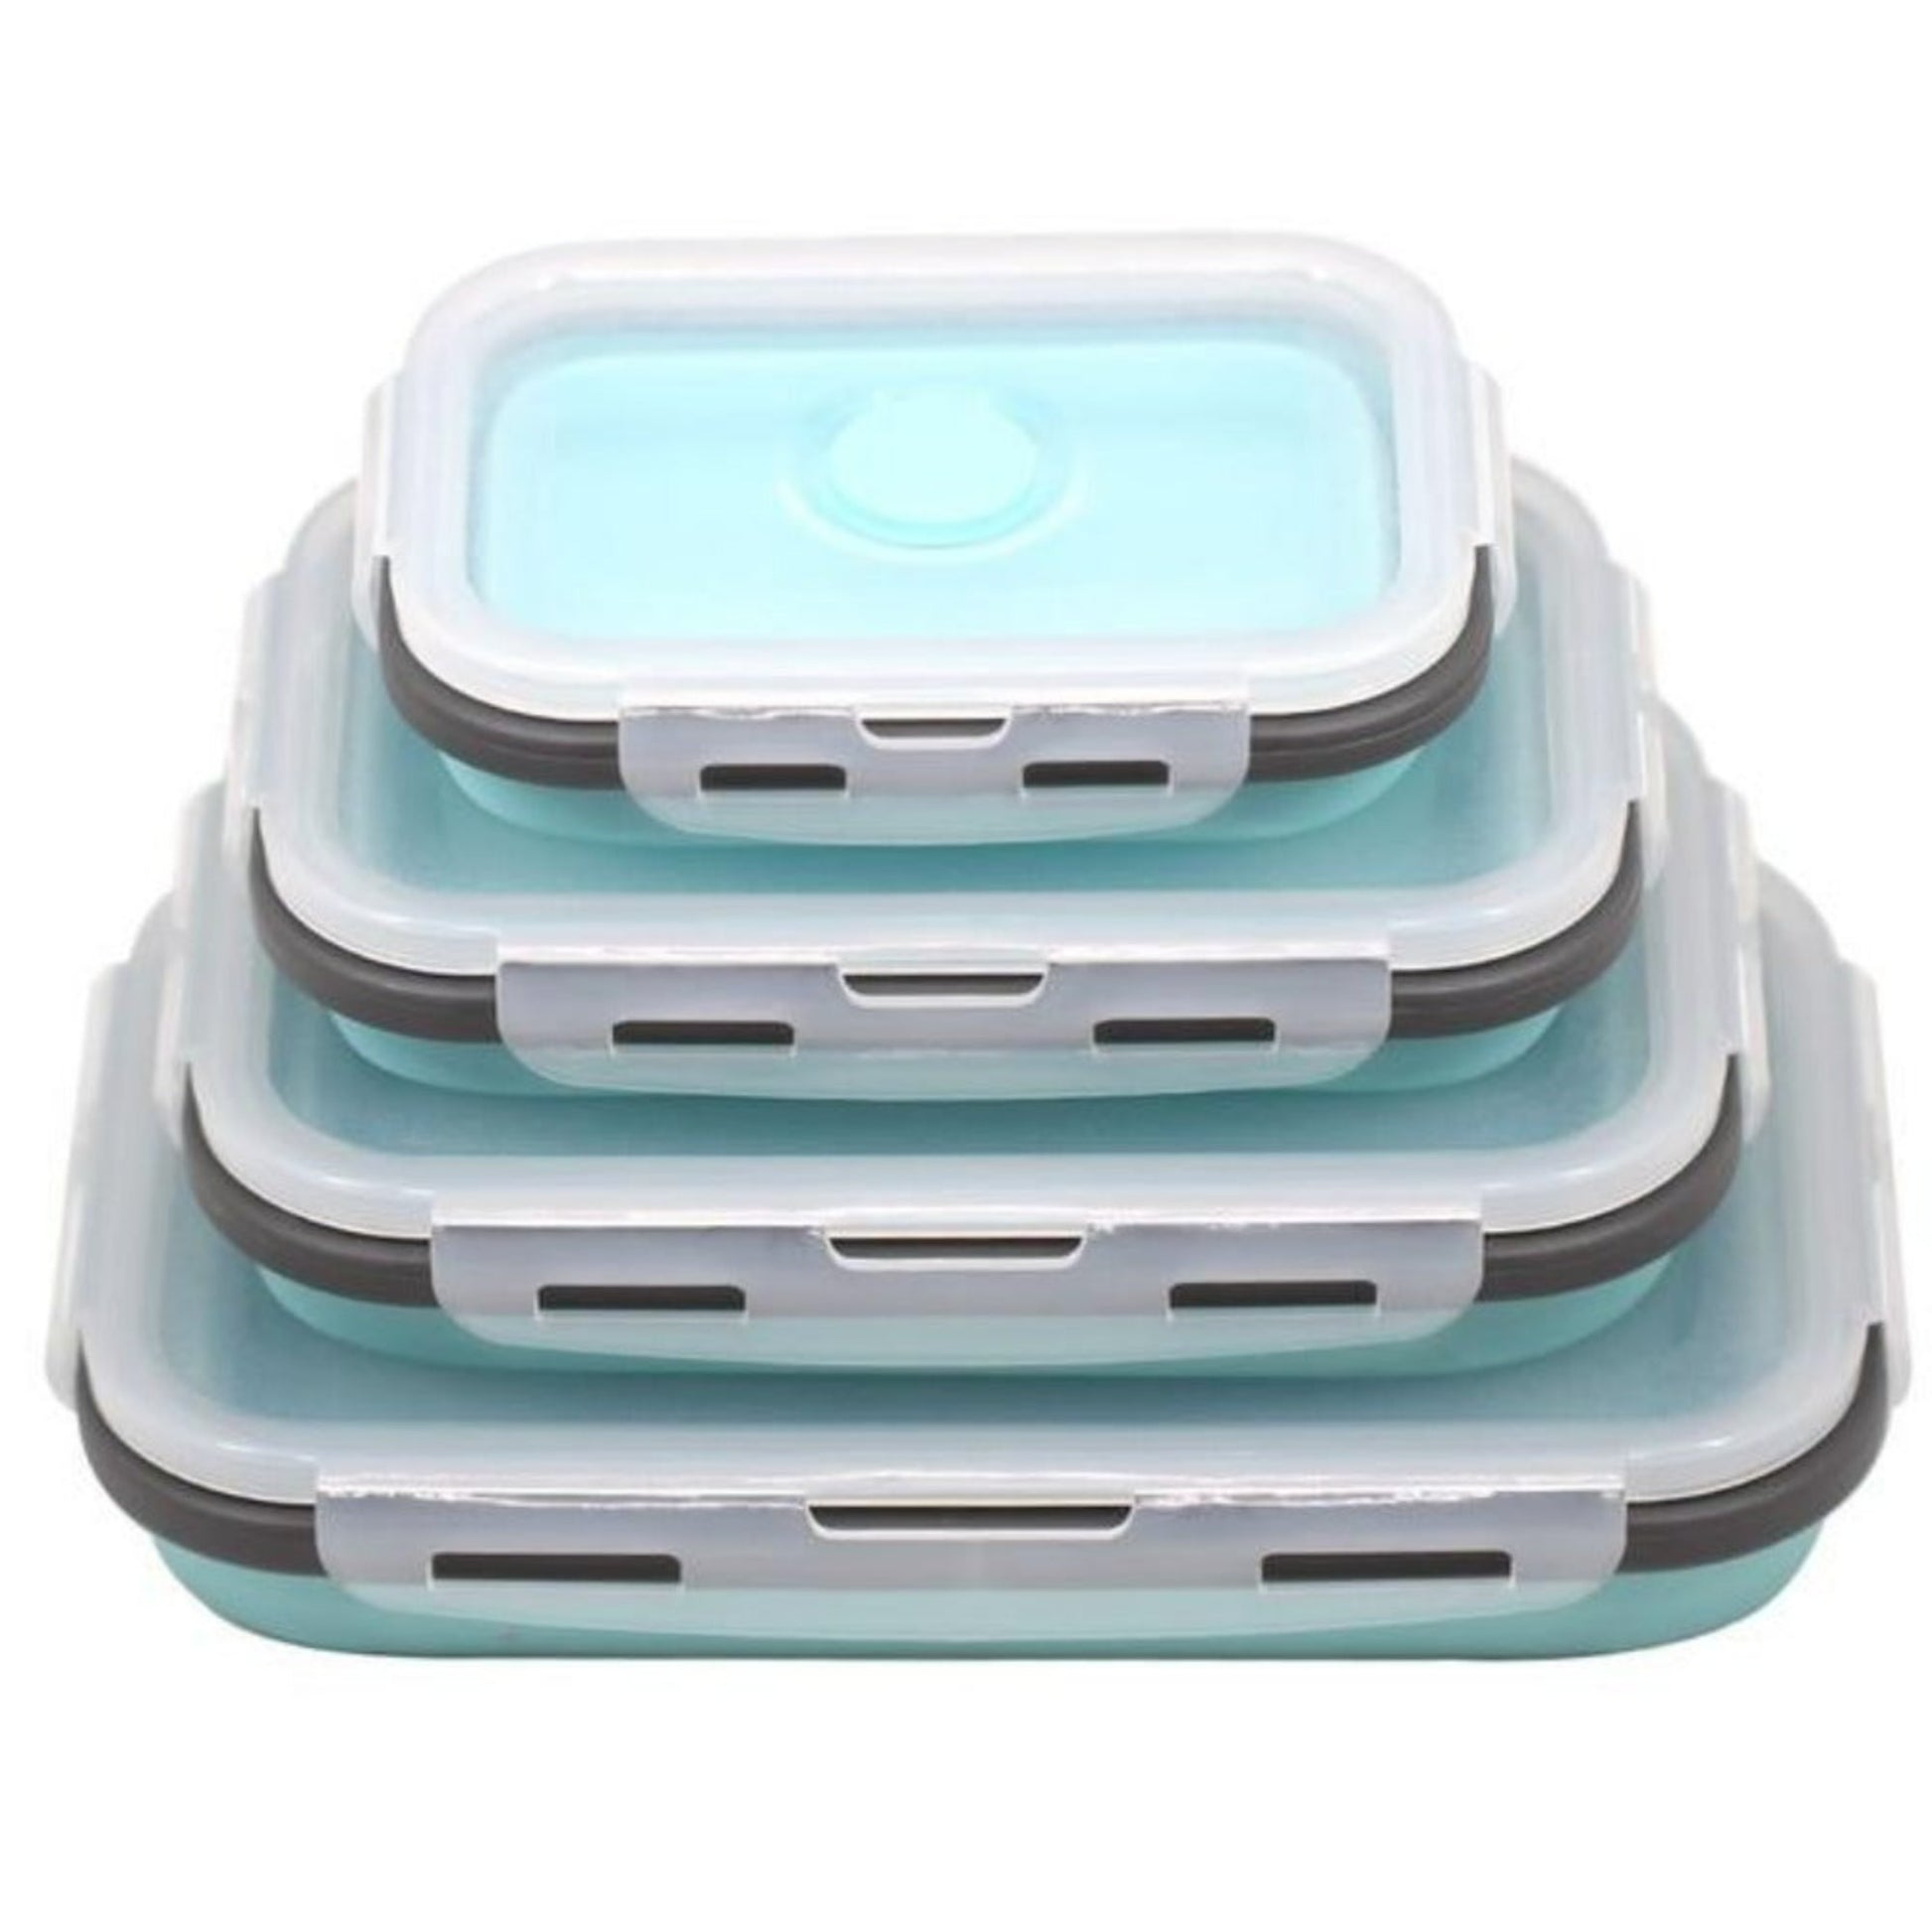 Collapsible Space Saving Food Storage Containers Set- 4 Pcs Blue